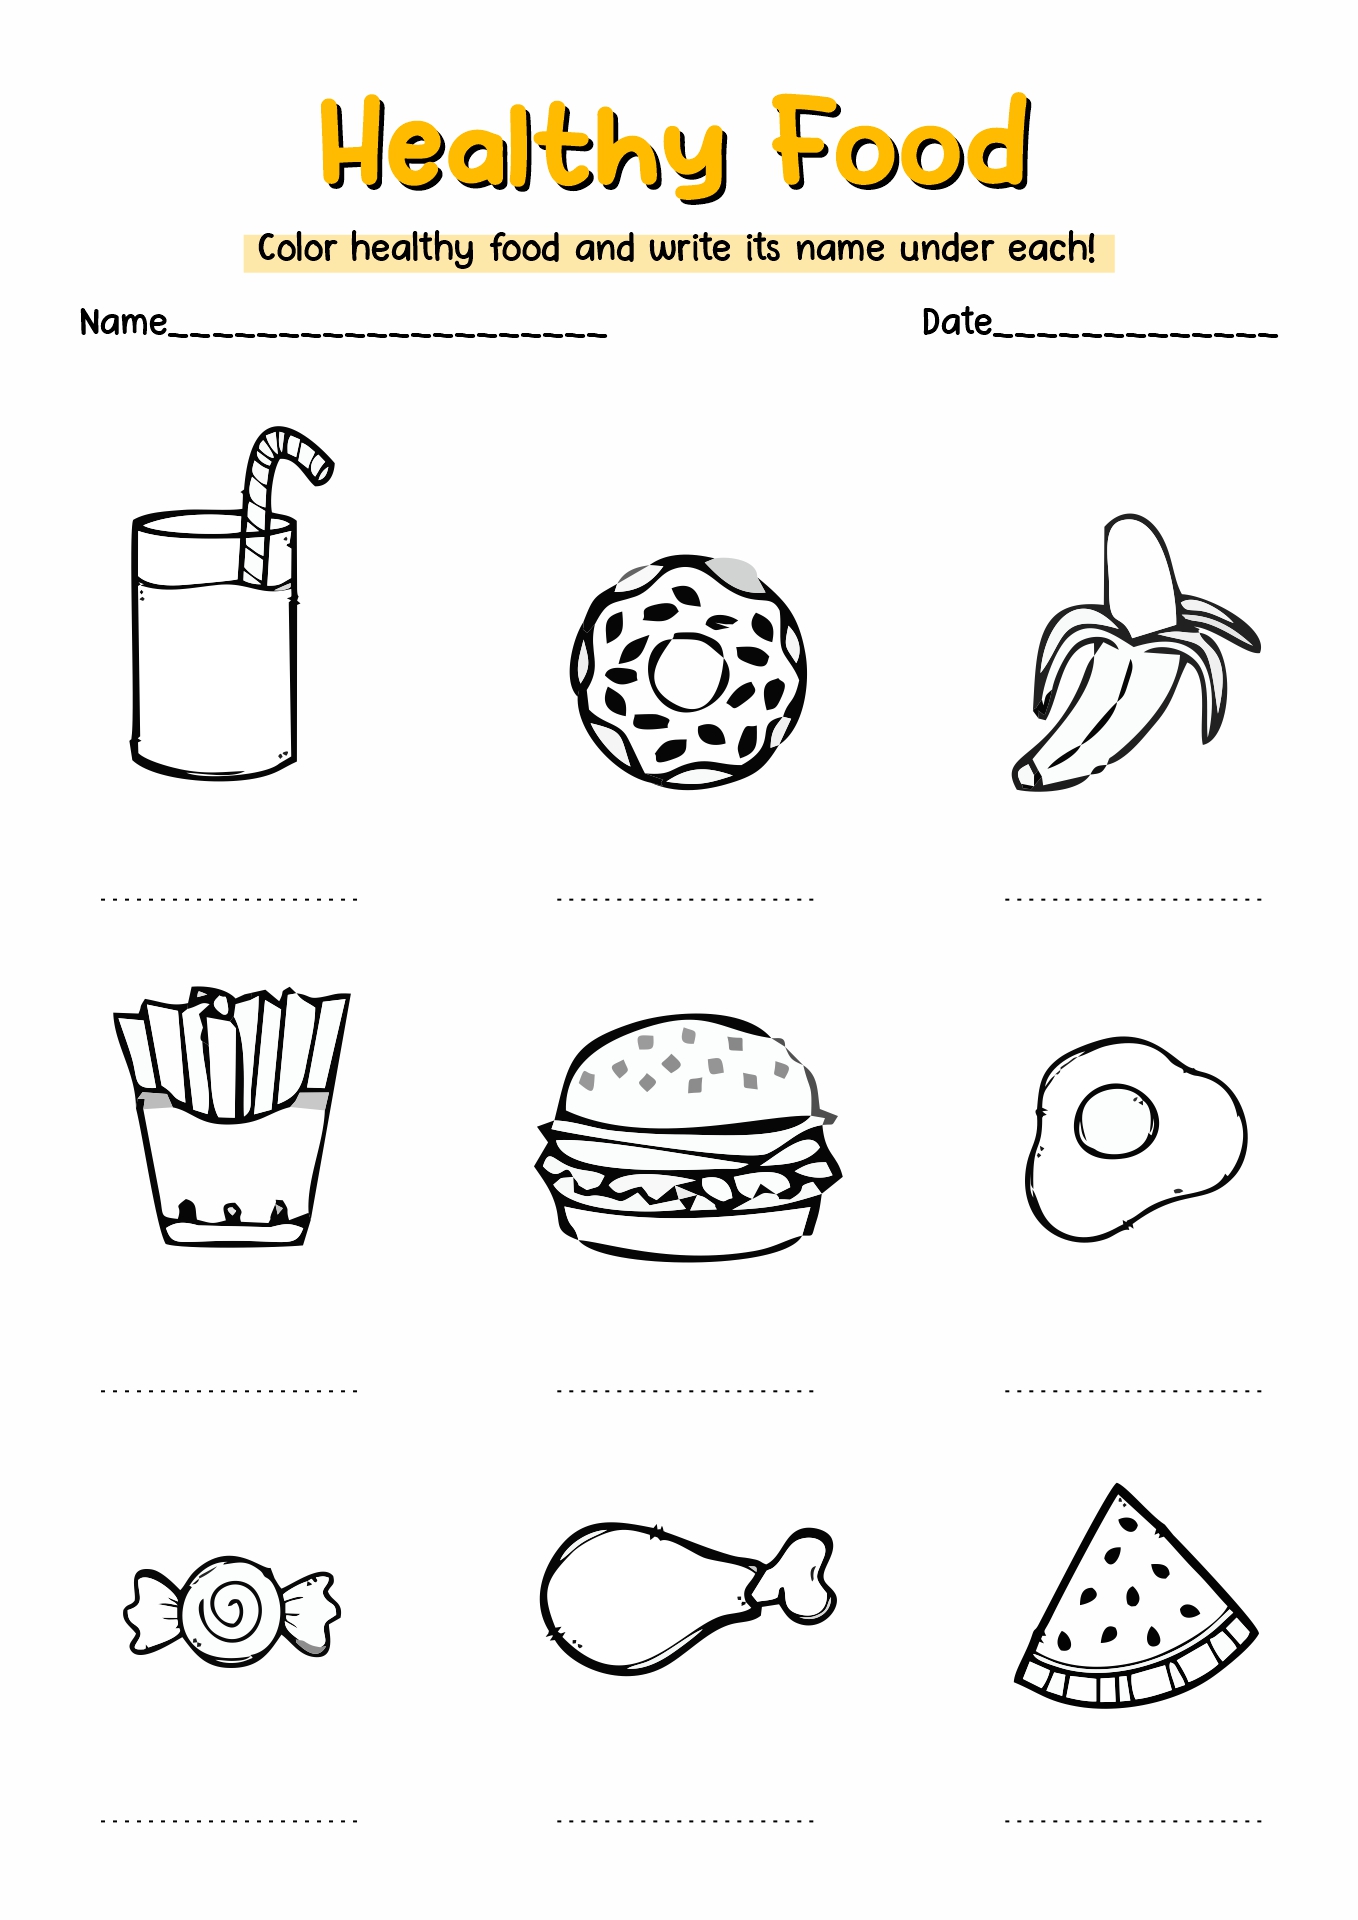 Healthy Foods Activity Sheets Image